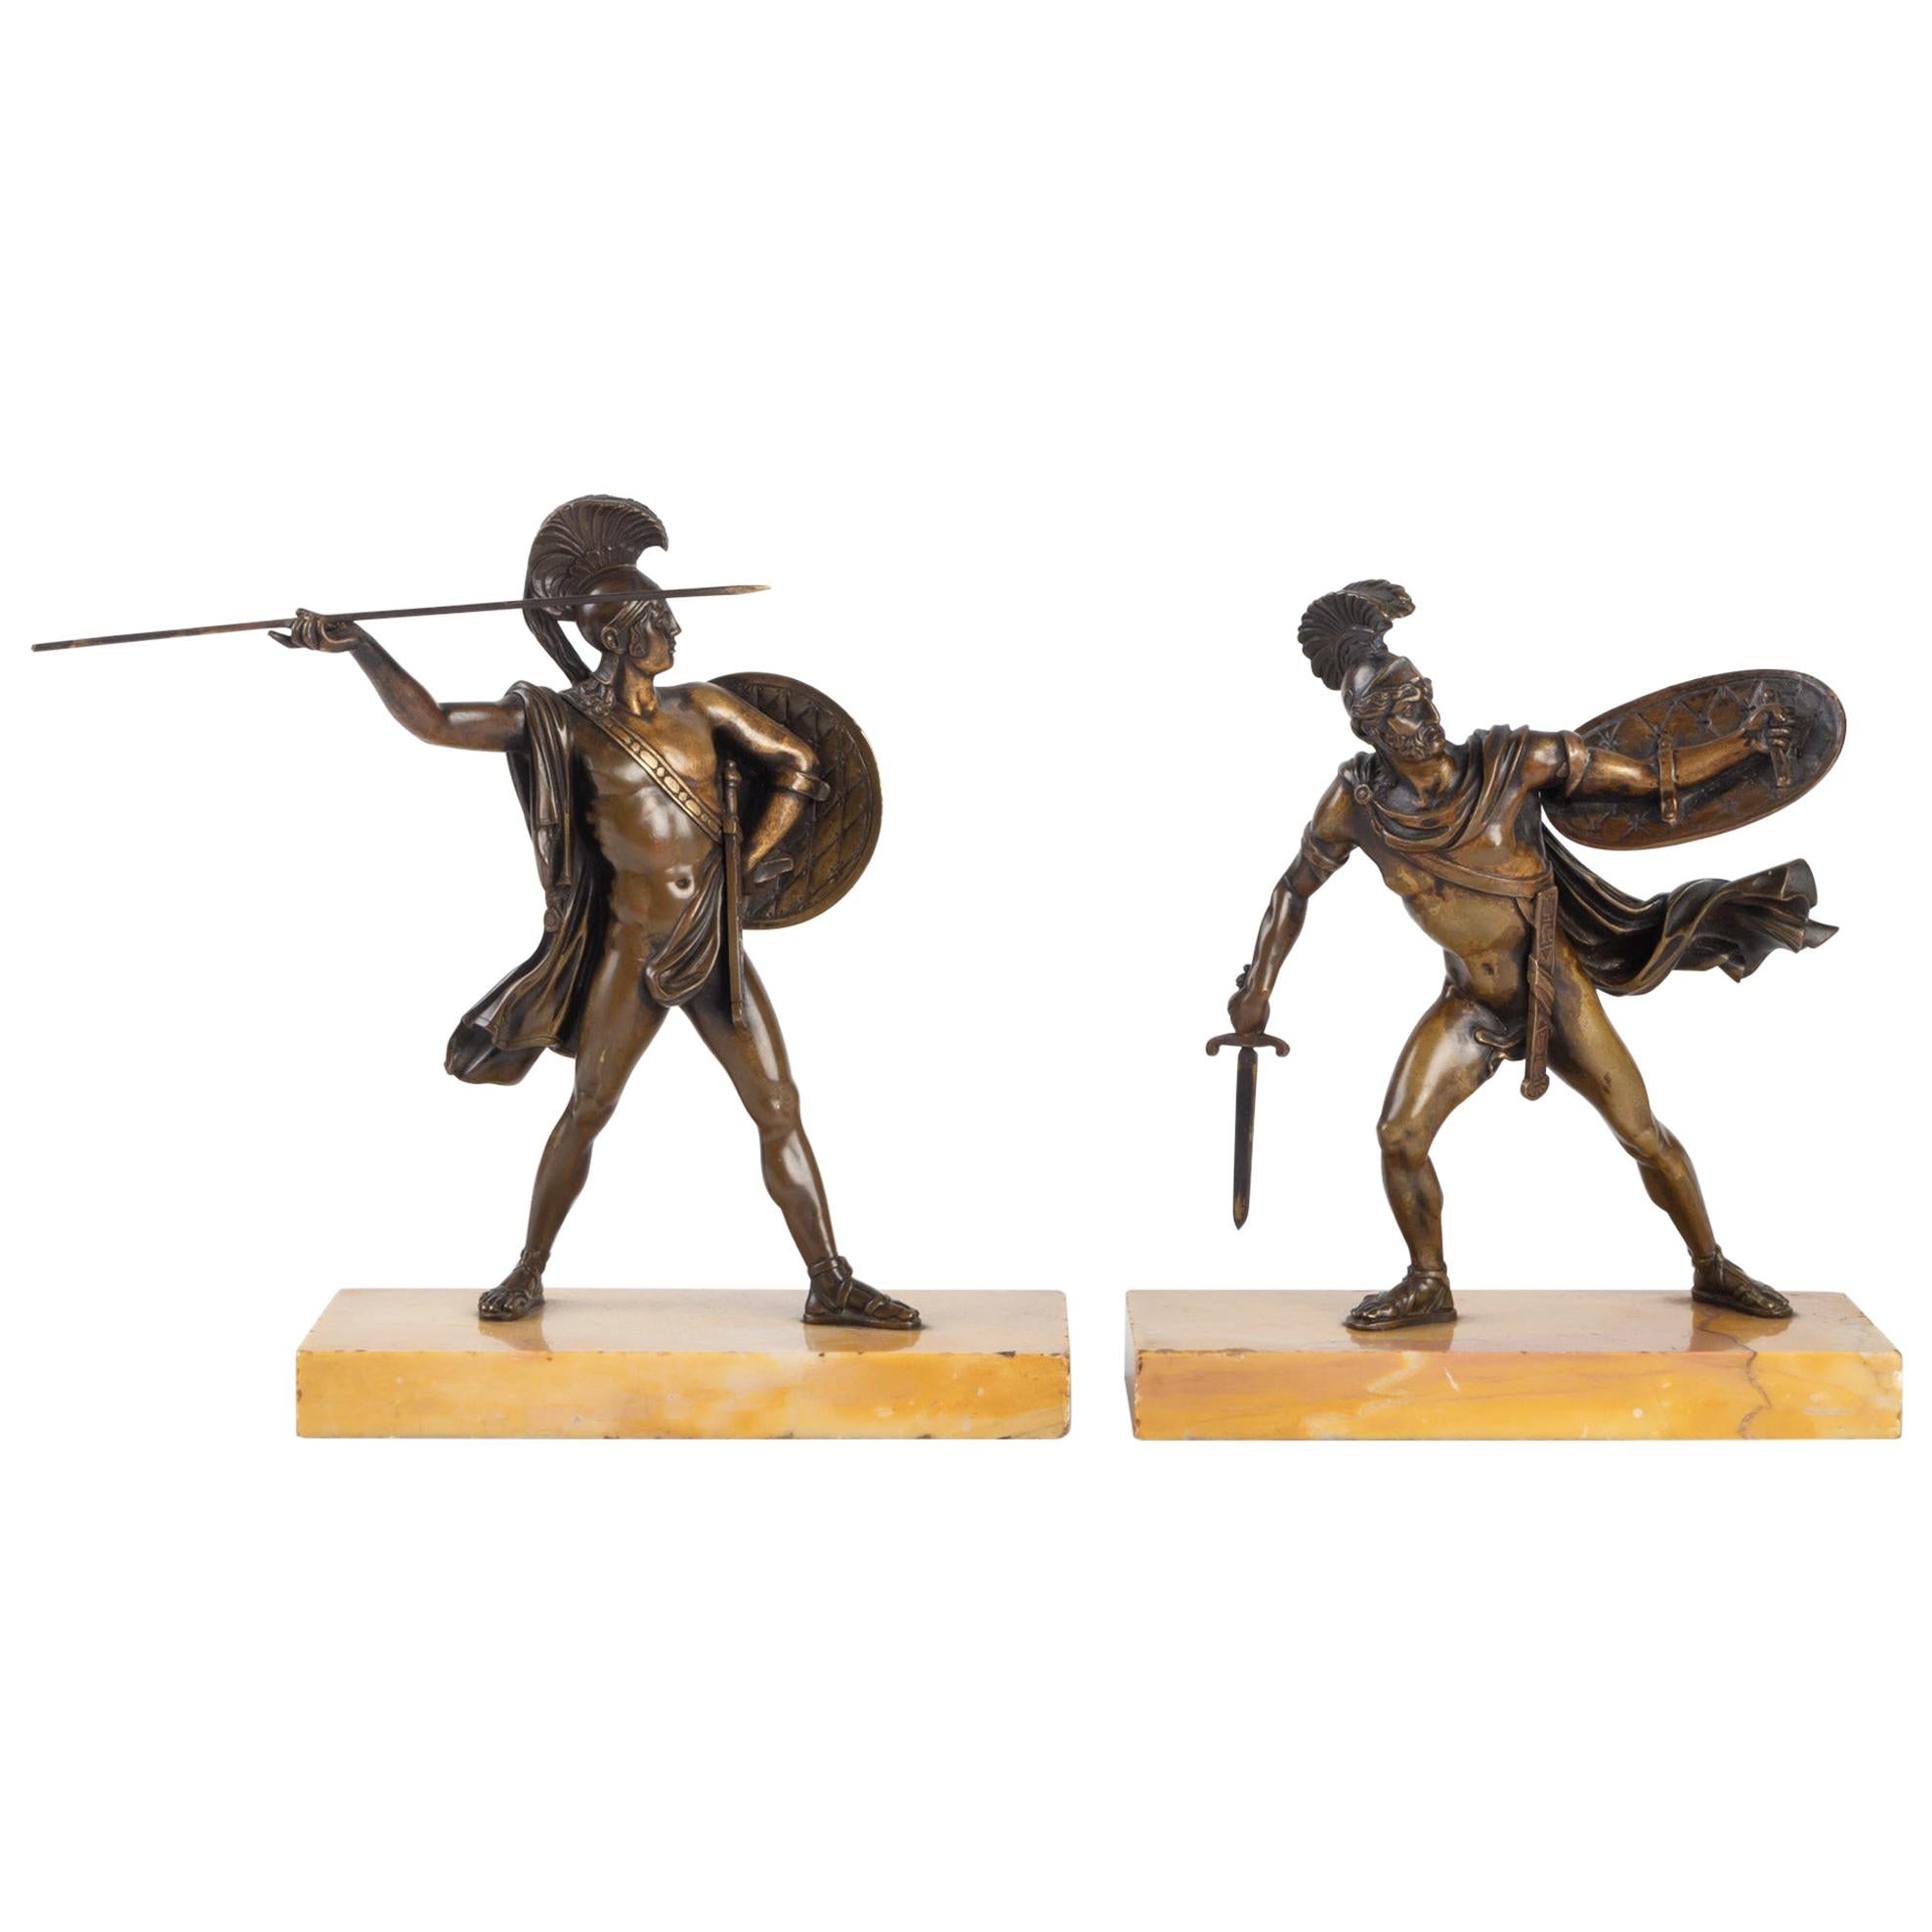 Pair of Patinated Bronzes Sculptures Horace and Curiace